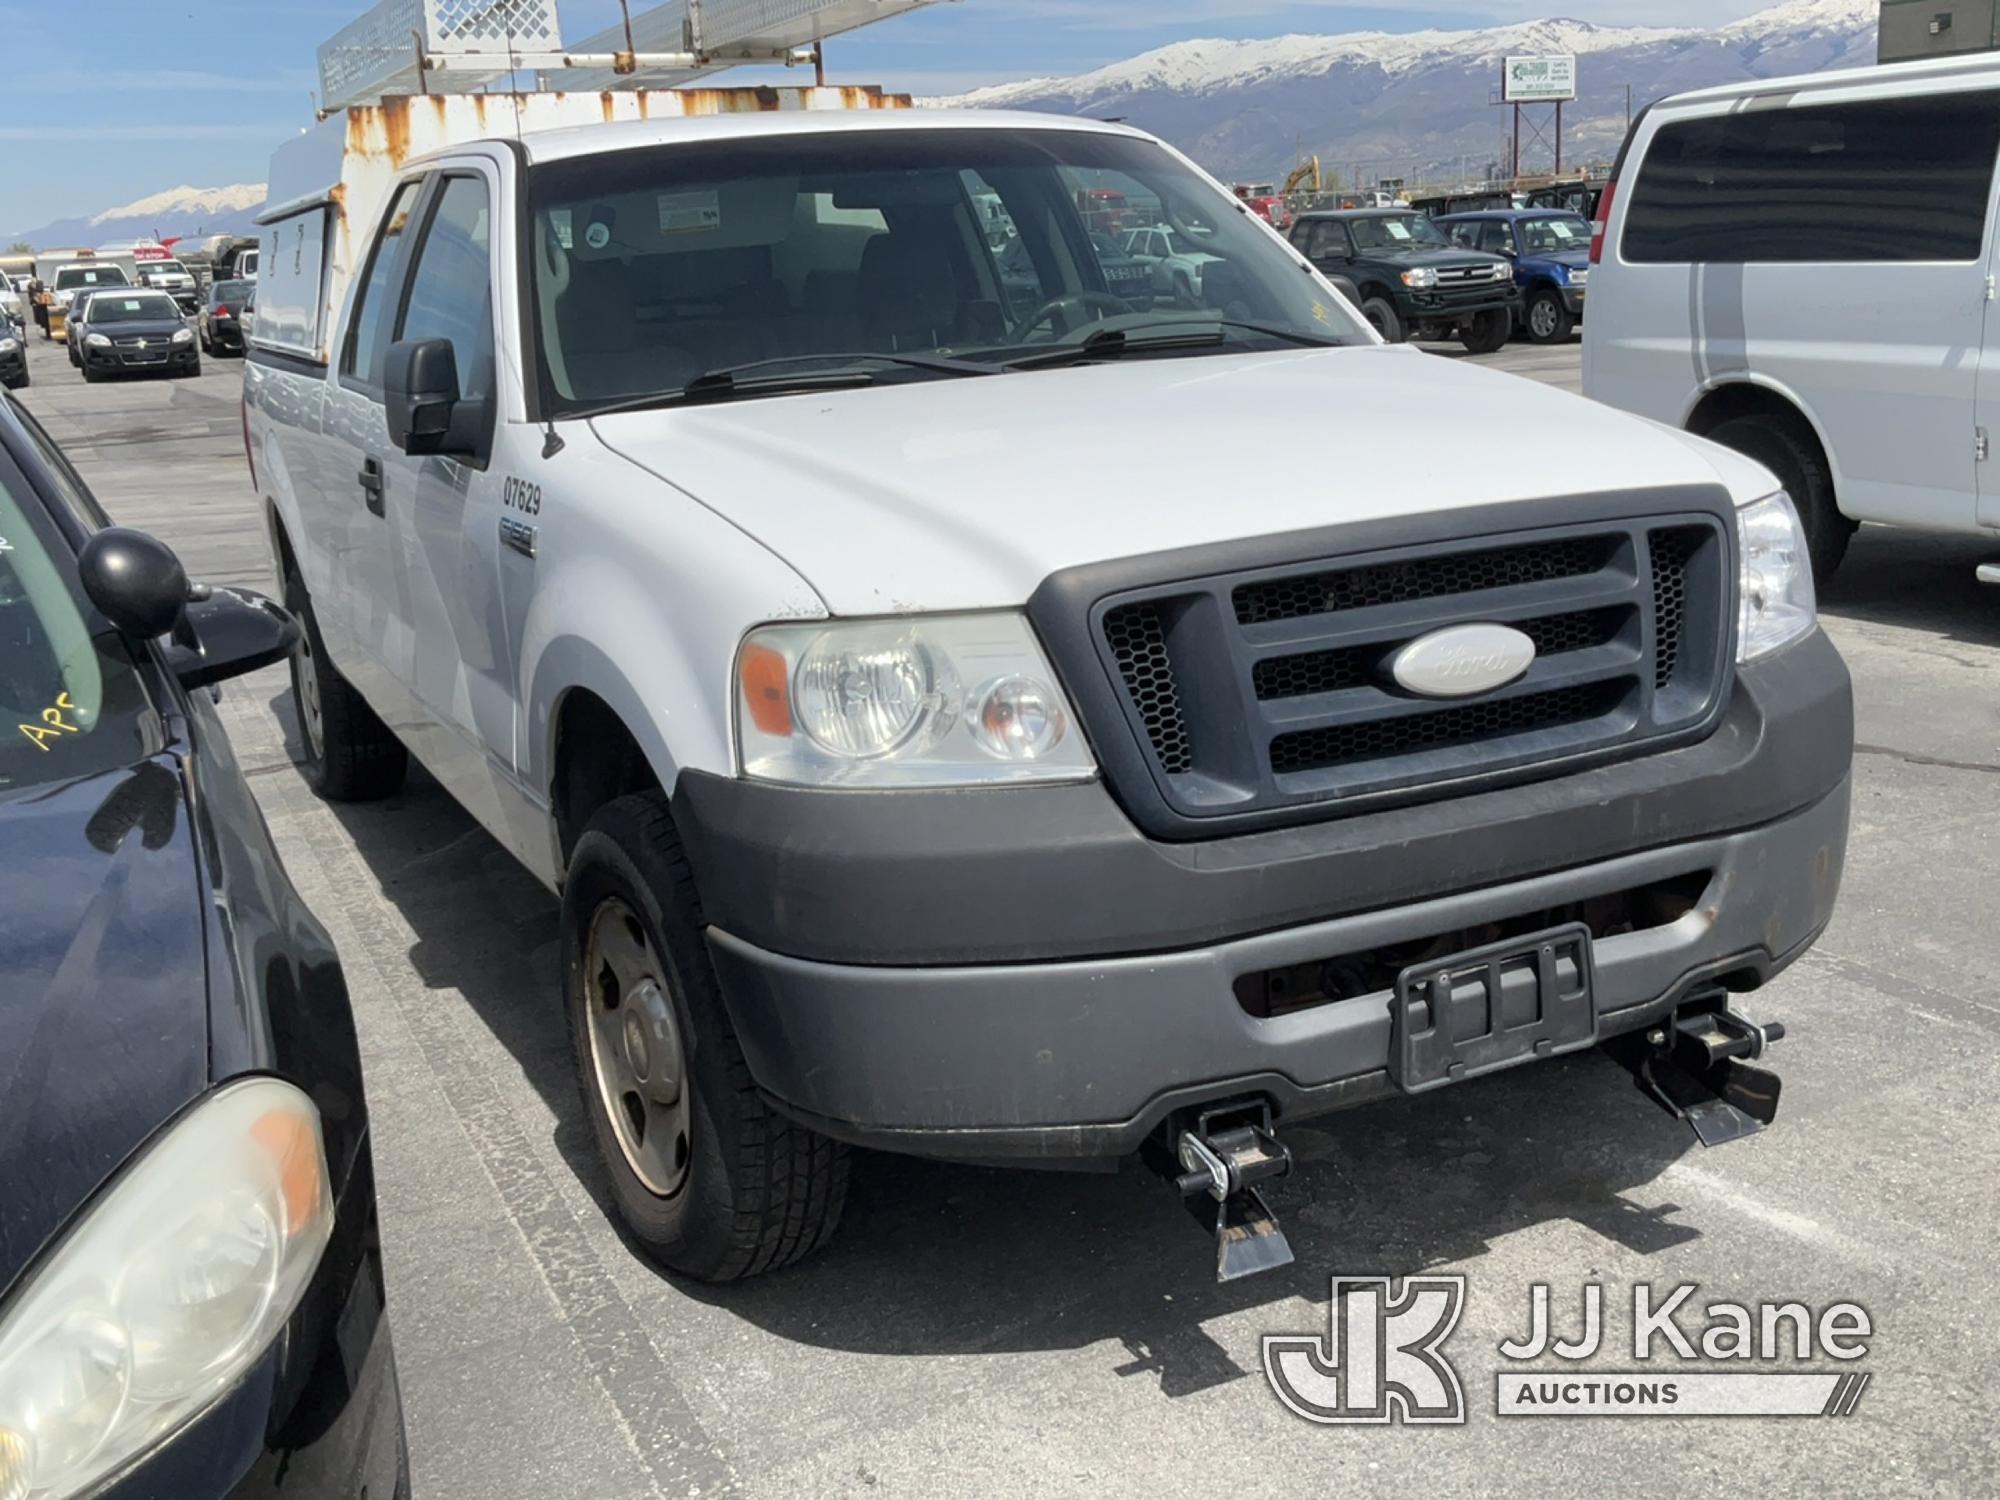 (Salt Lake City, UT) 2007 Ford F150 4x4 Extended-Cab Pickup Truck Not Running, Condition Unknown